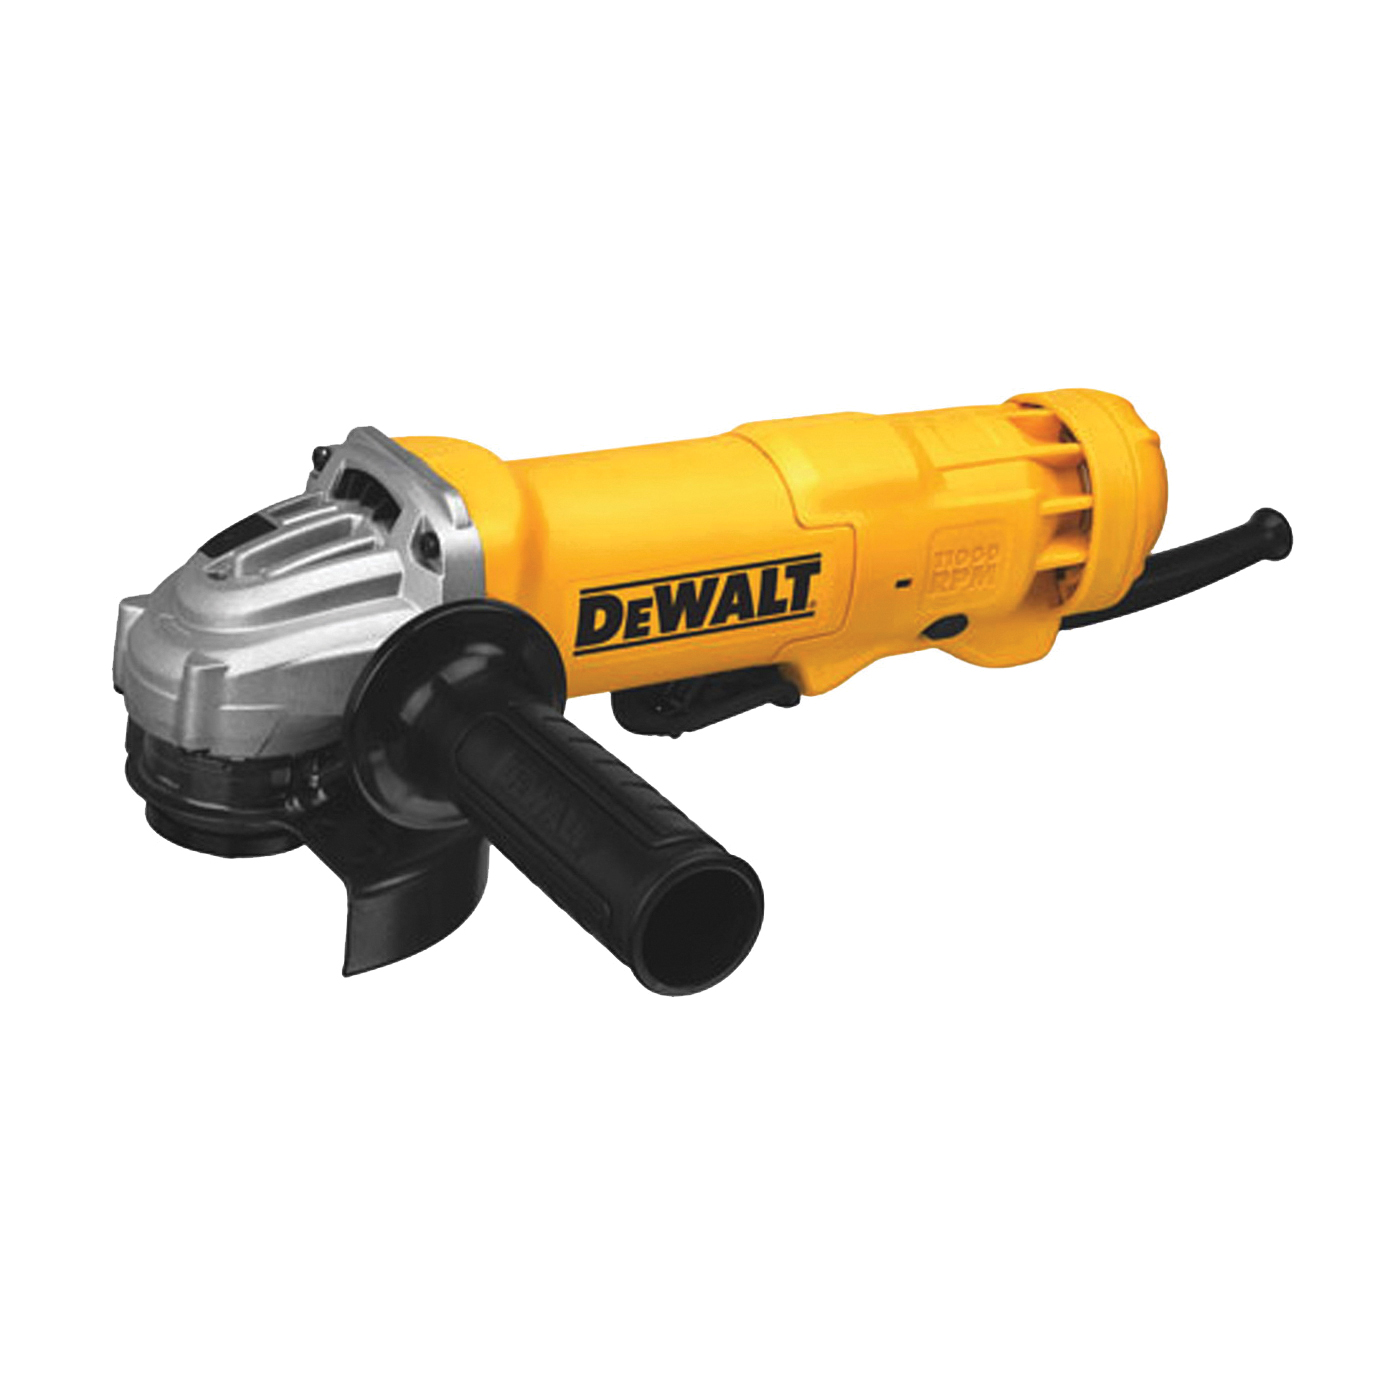 DWE402 Small Angle Grinder, 11 A, 5/8-11 Spindle, 4-1/2 in Dia Wheel, 11,000 rpm Speed